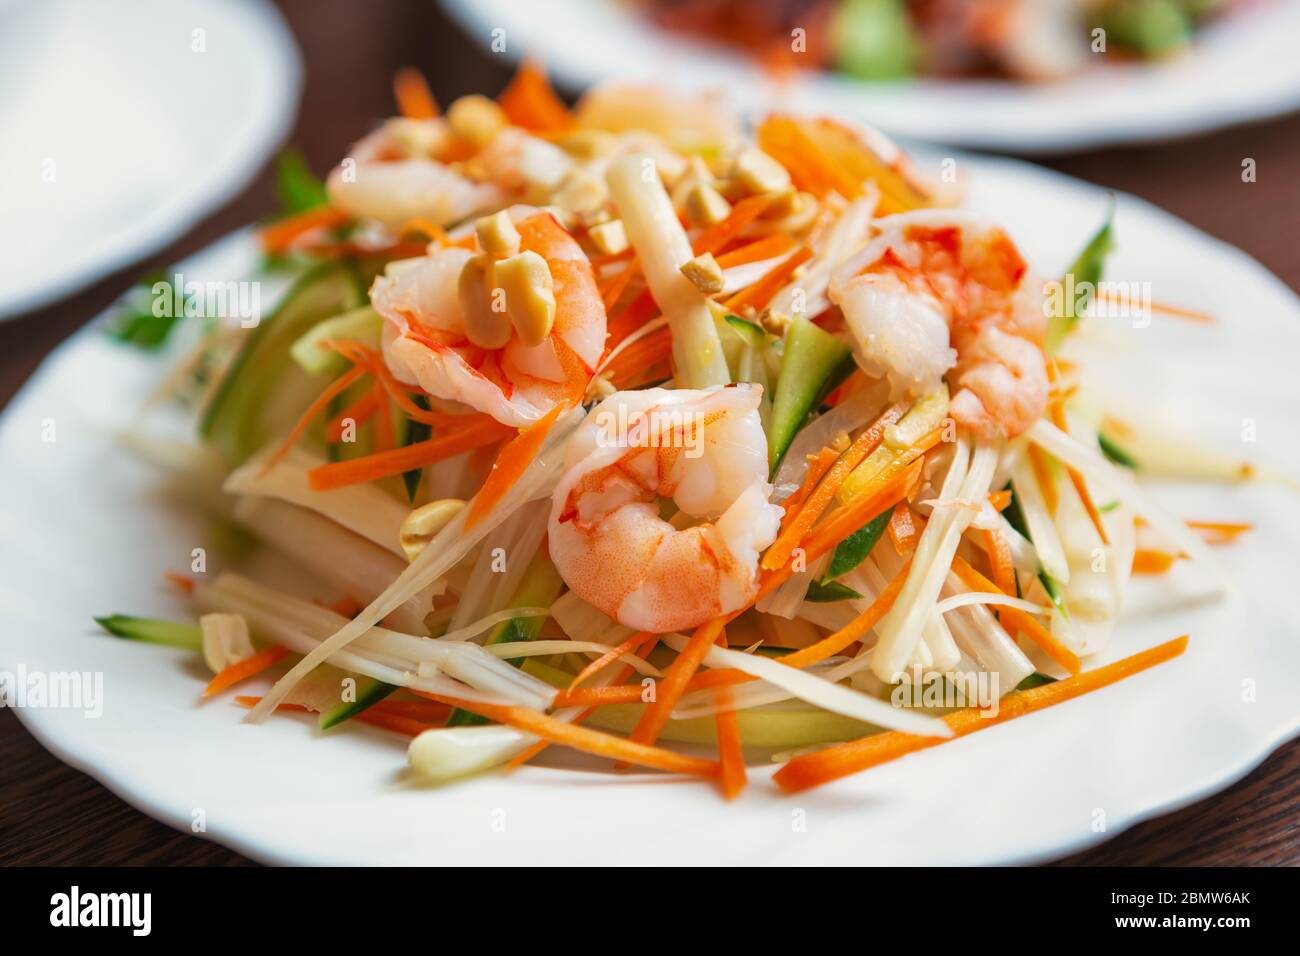 https://c8.alamy.com/comp/2BMW6AK/asian-sea-foodshrimp-salad-with-raw-cabbage-served-on-white-plate-in-vietnamese-restaurantfresh-seafood-for-healthy-eatingdiet-nutrition-and-exotic-2BMW6AK.jpg